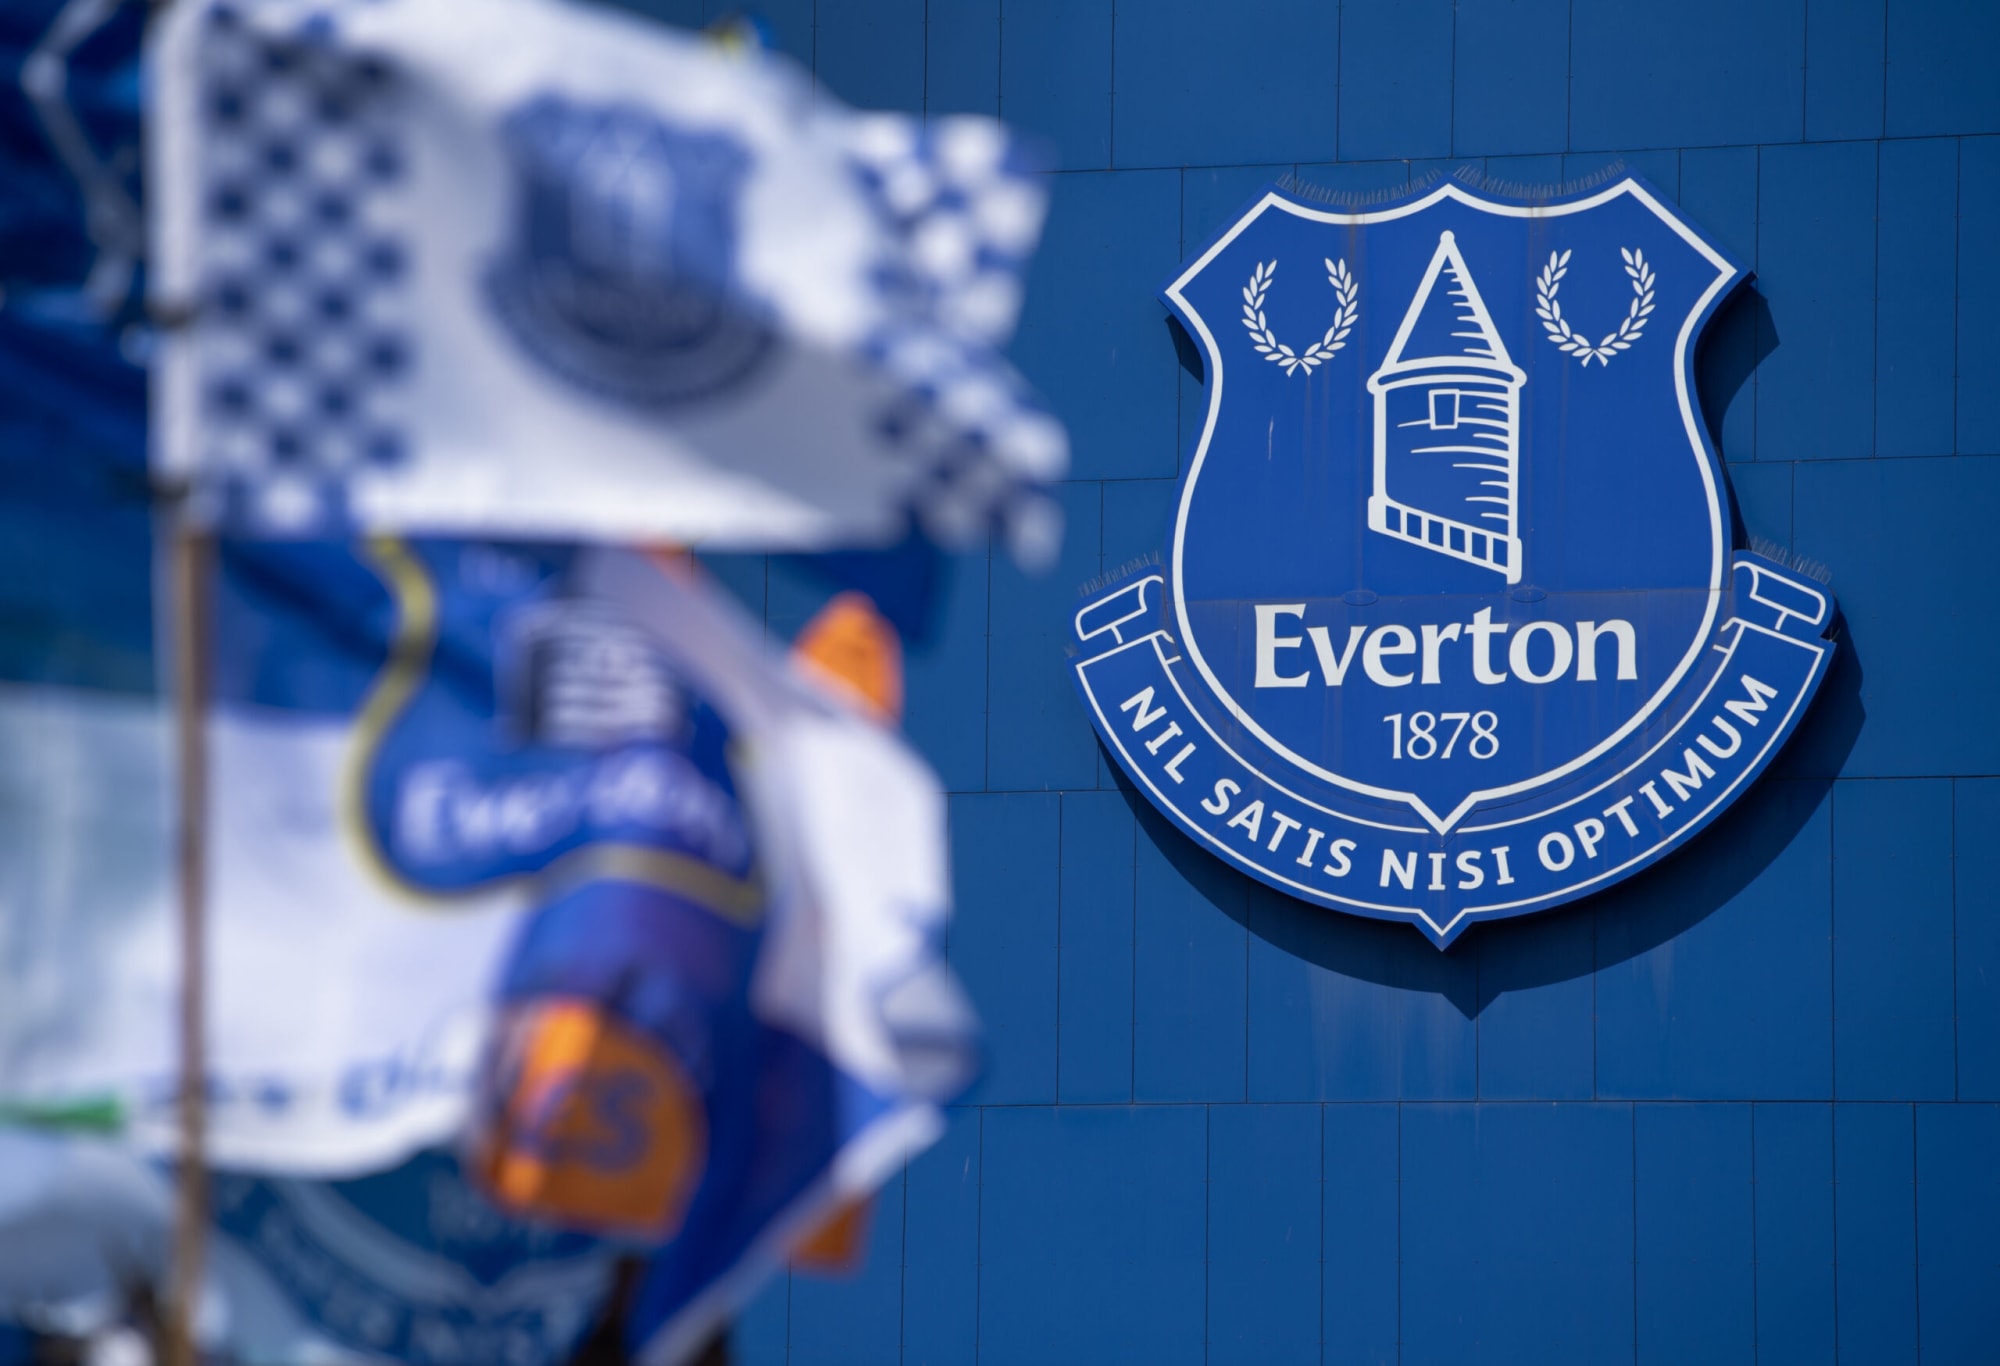 Everton have another chance to start season well after fixtures release